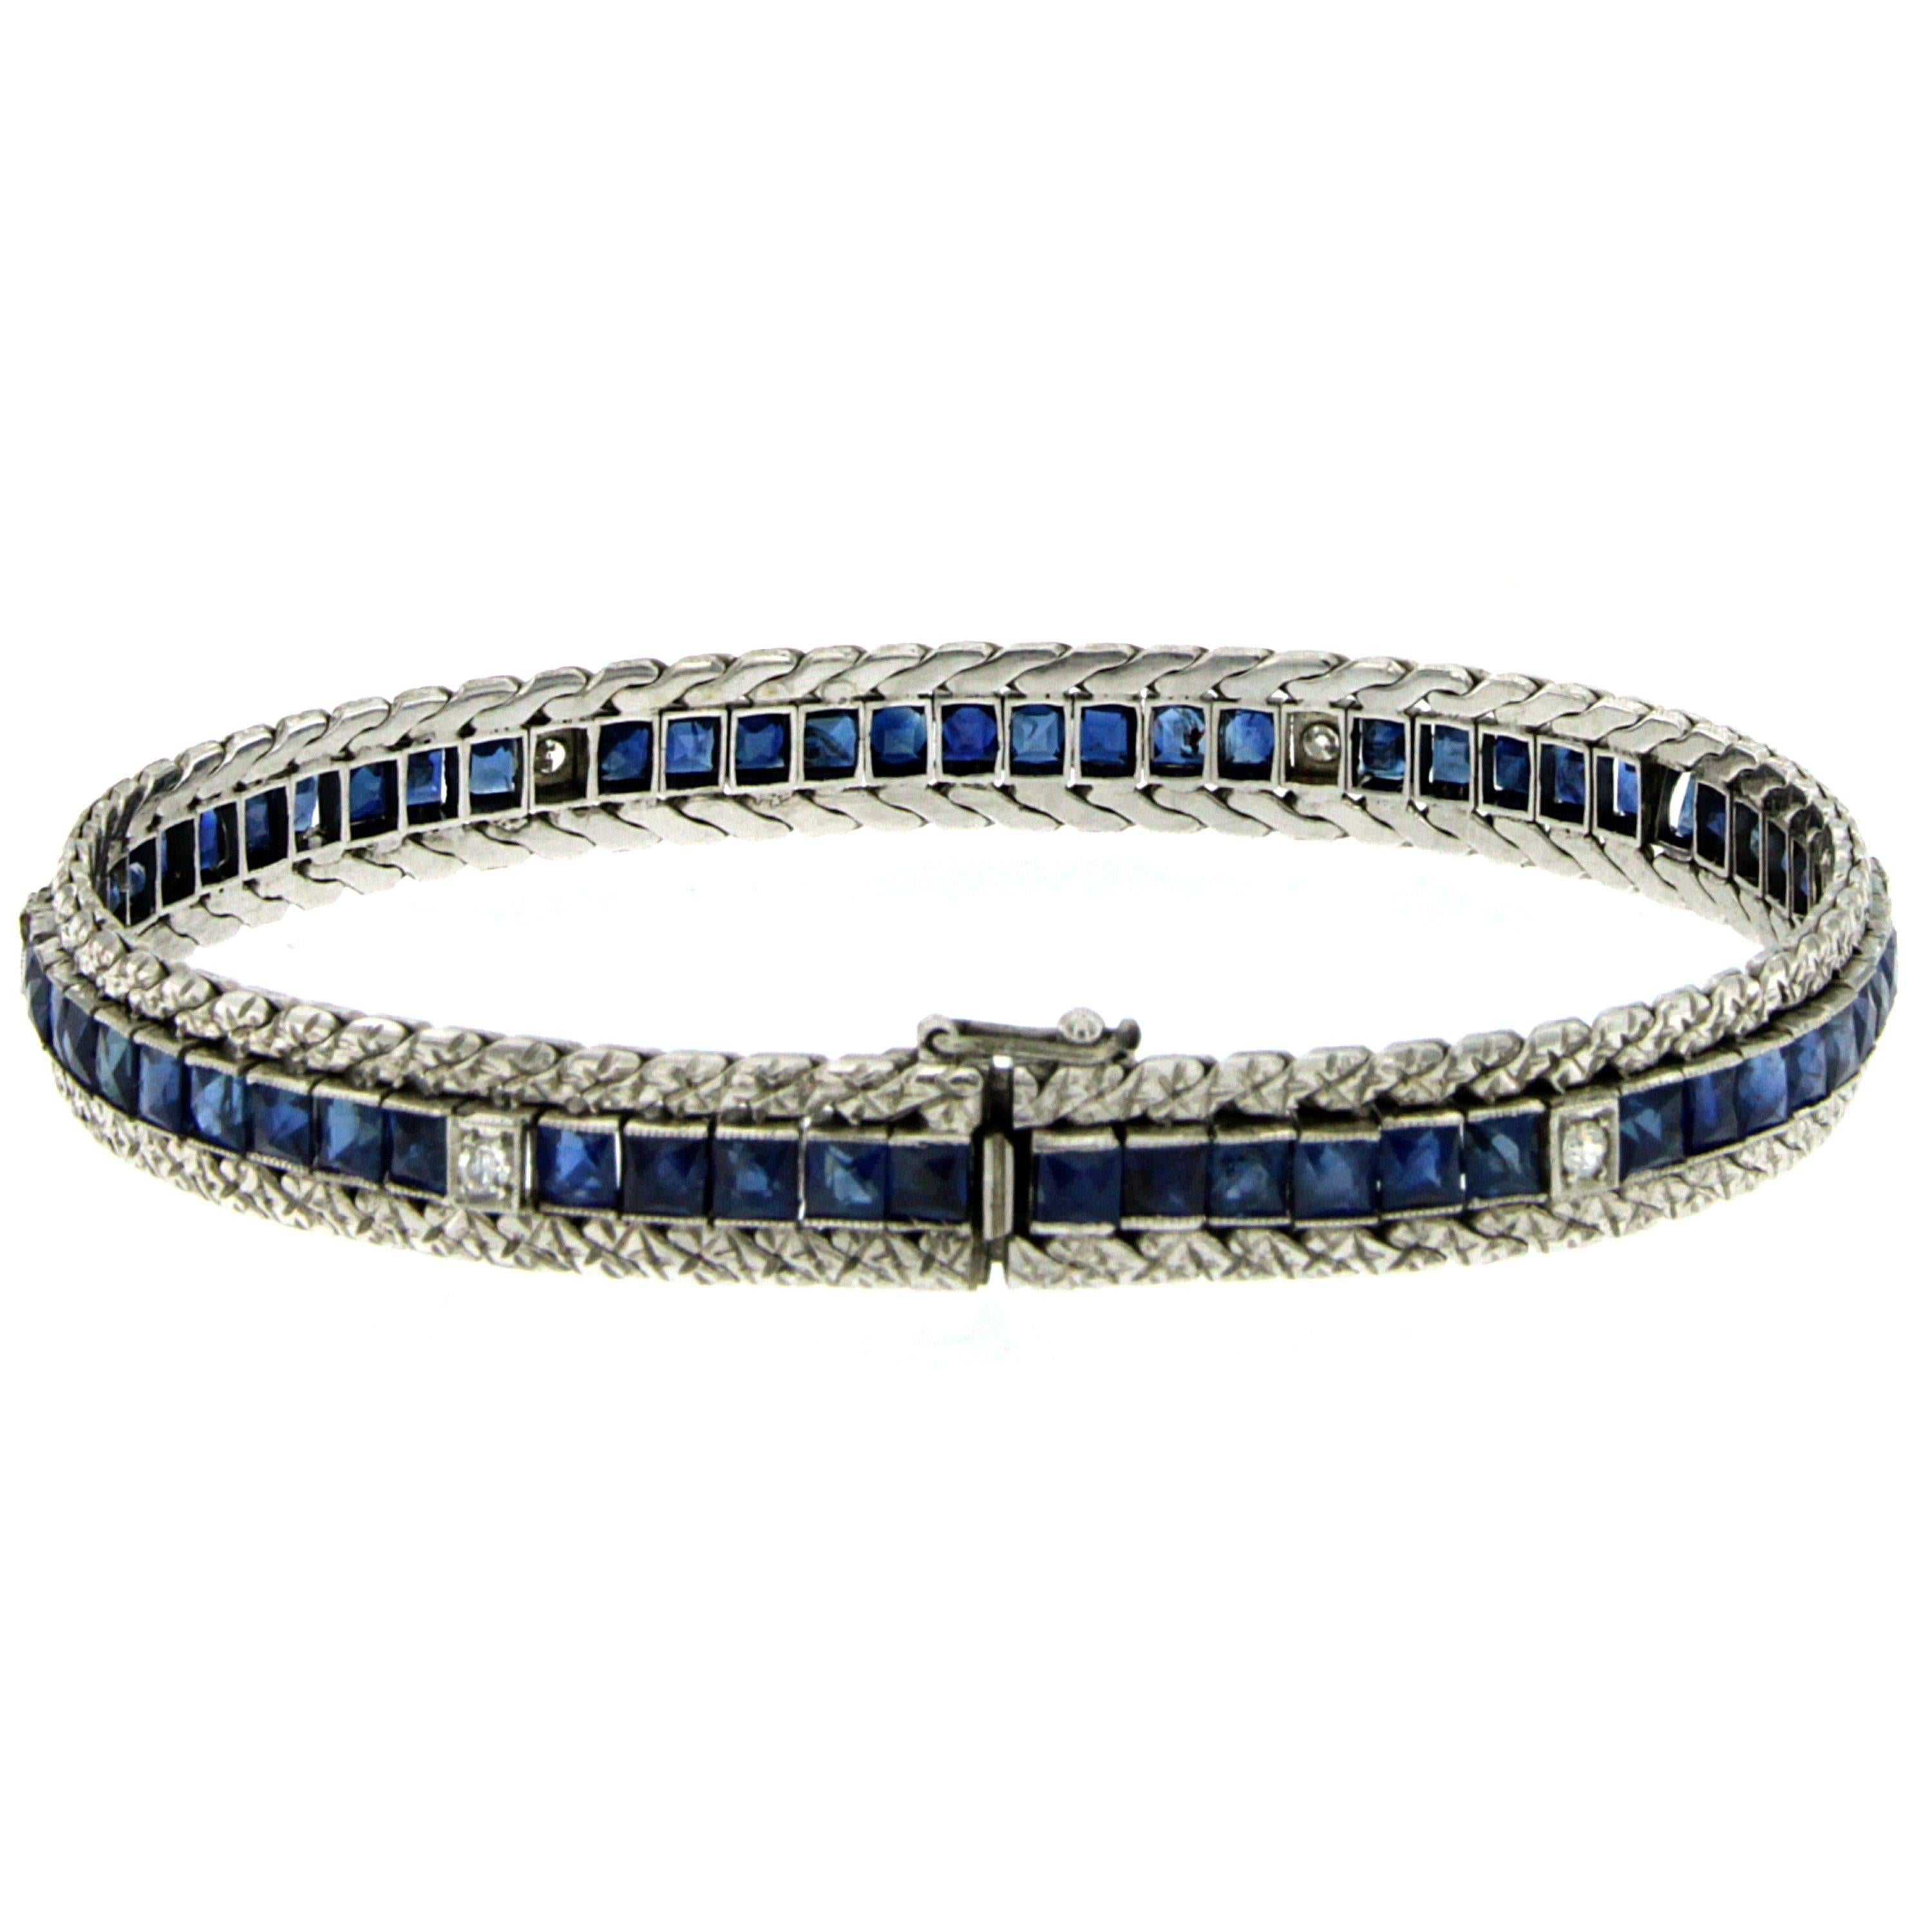 Platinum and White Gold Art Deco bracelet, set with sixty fine natural Blue Sapphire custom cut weighing 8,00 carats alternate with six sparkling Old European Cut Diamonds weighing 0,24 ct. graded I color, Vs clarity. 
It is engraved in typical Art